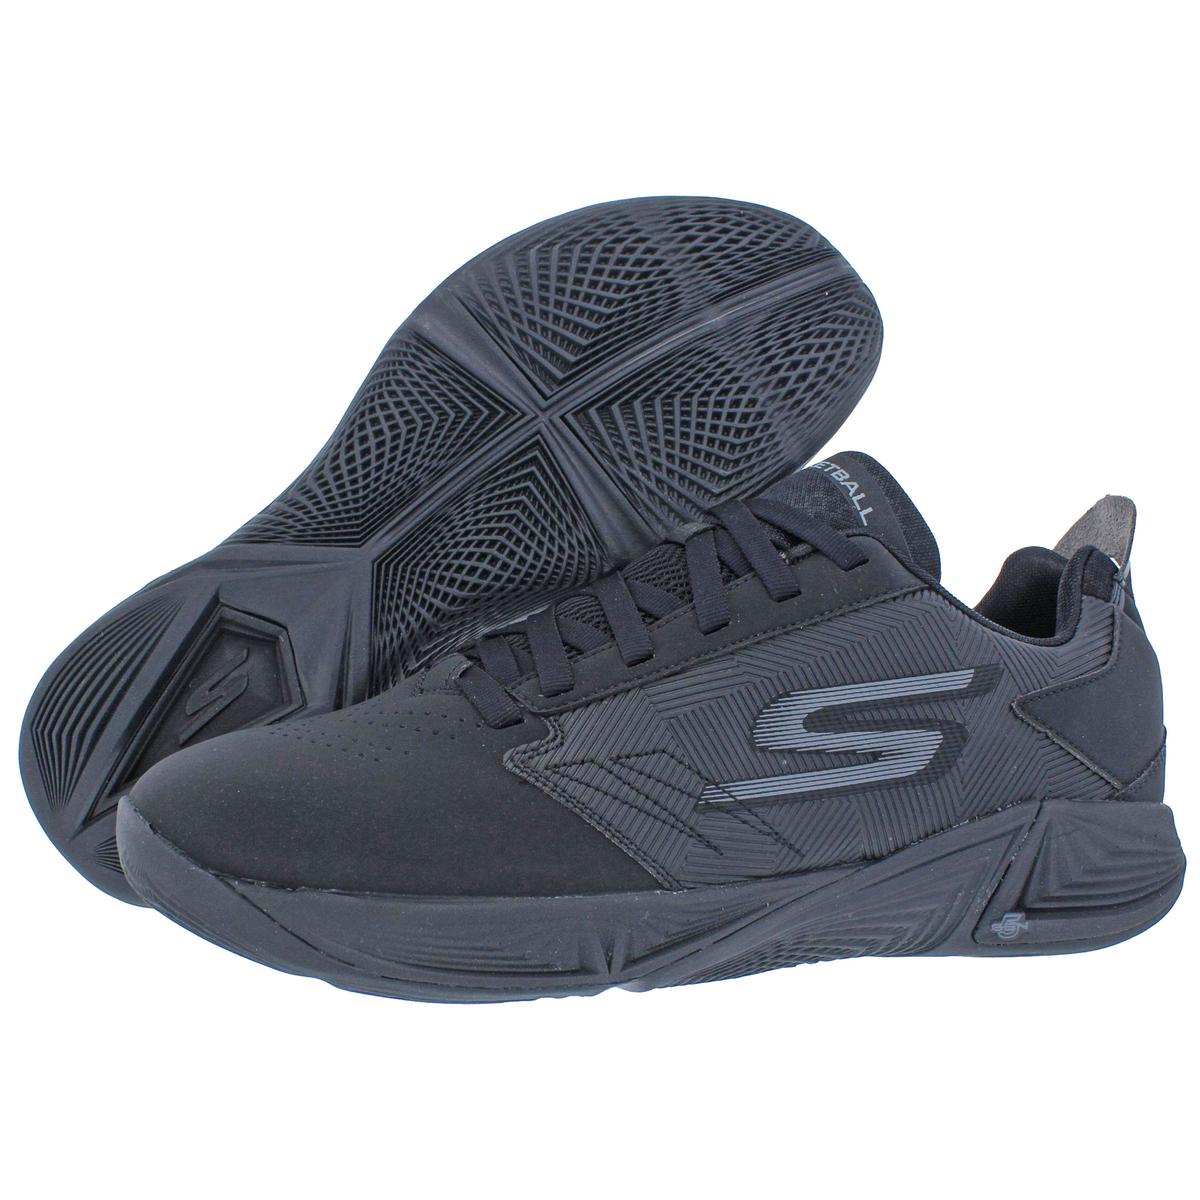 skechers basketball shoes price